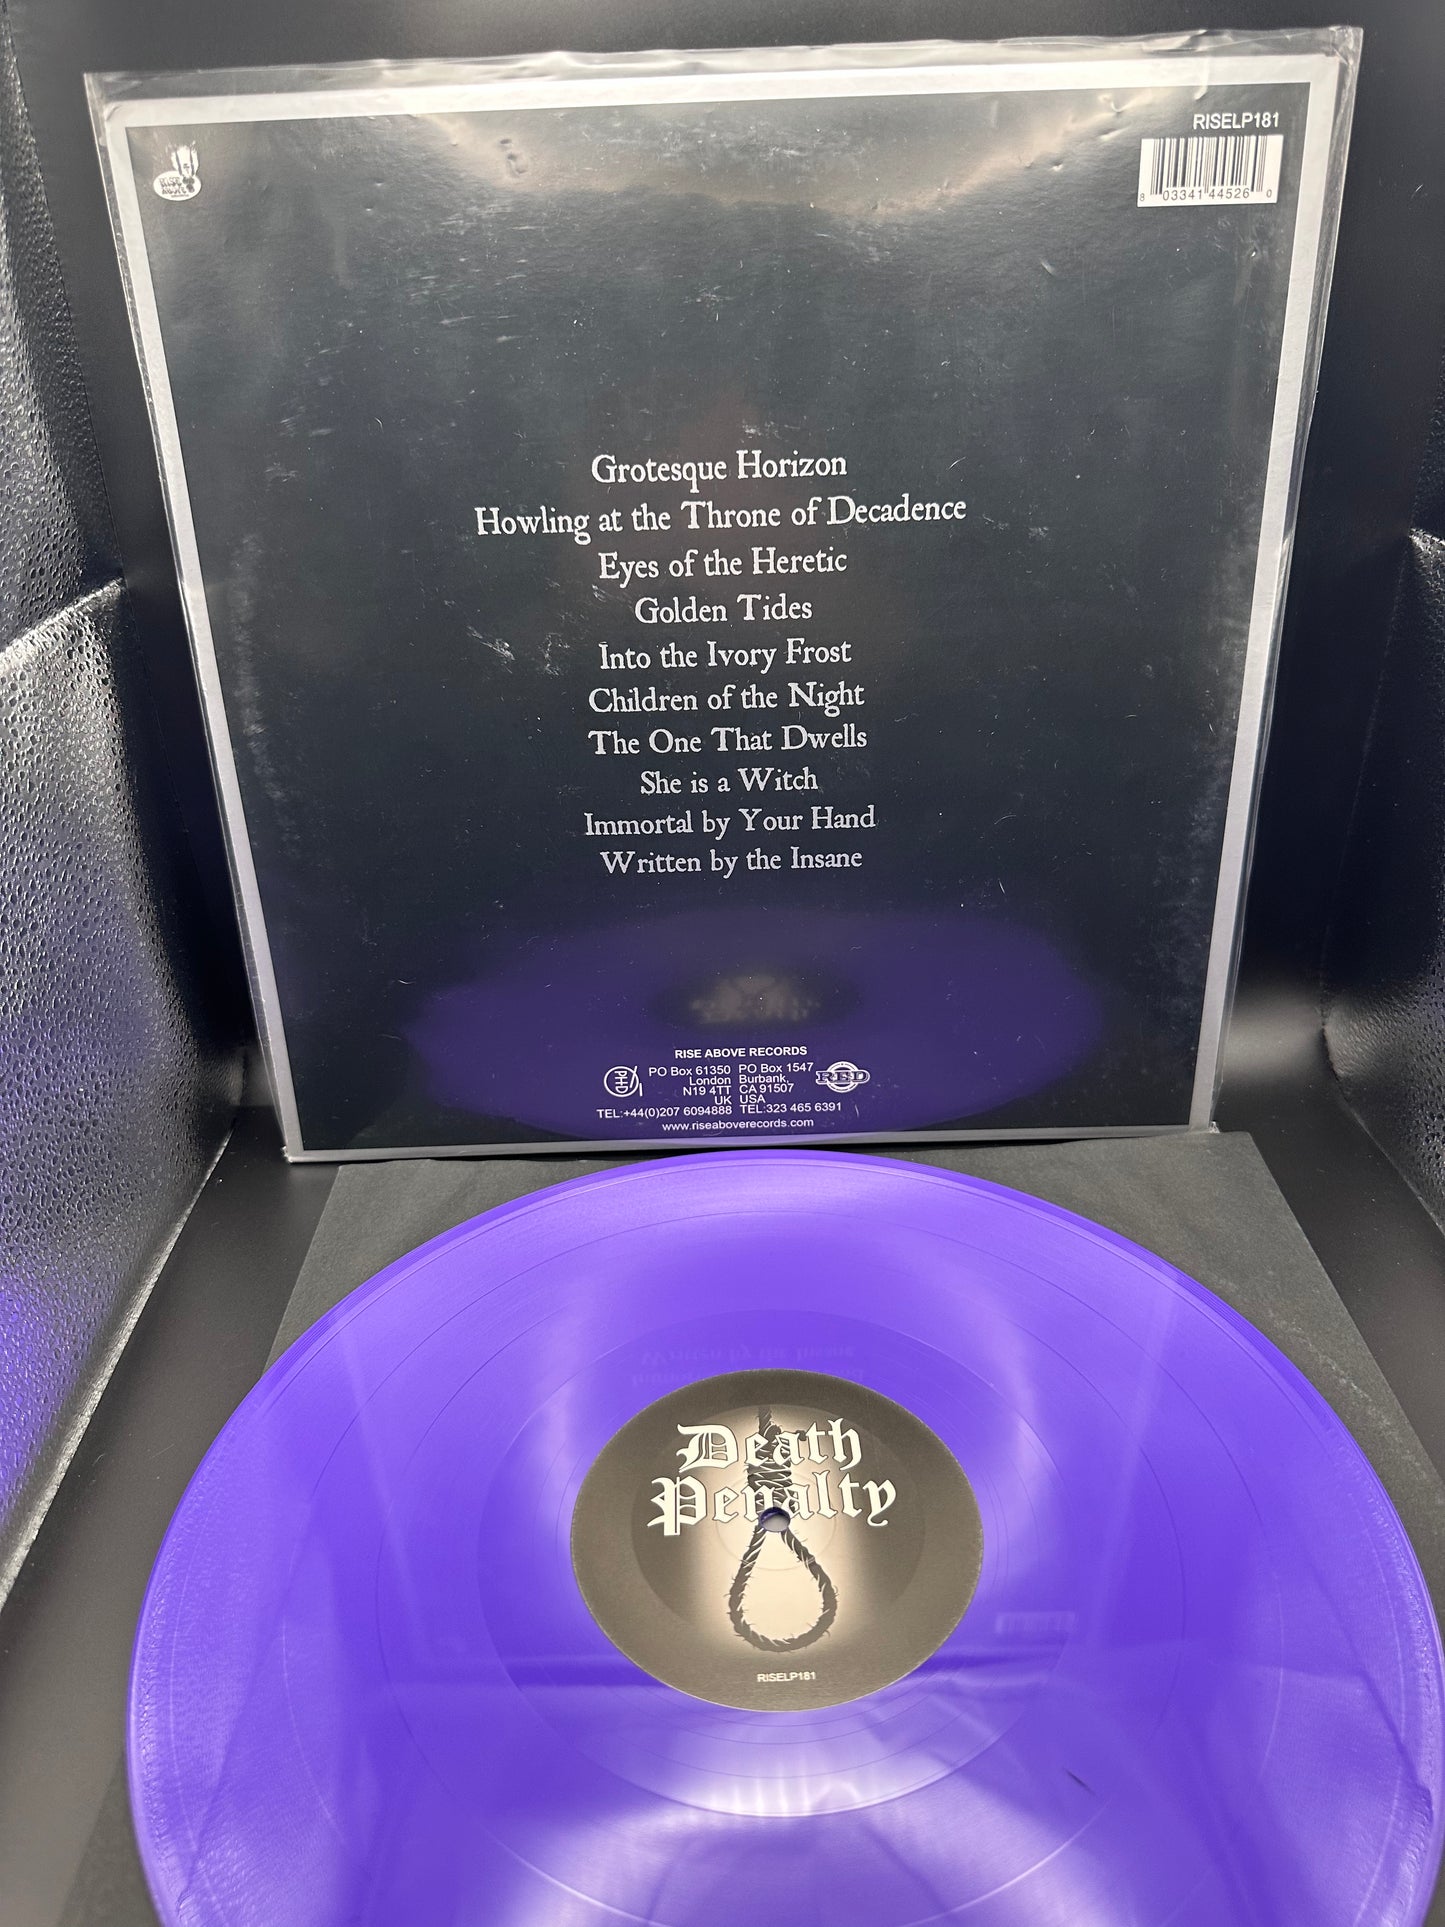 Death Penalty - Death Penalty (Colored Vinyl/Used)